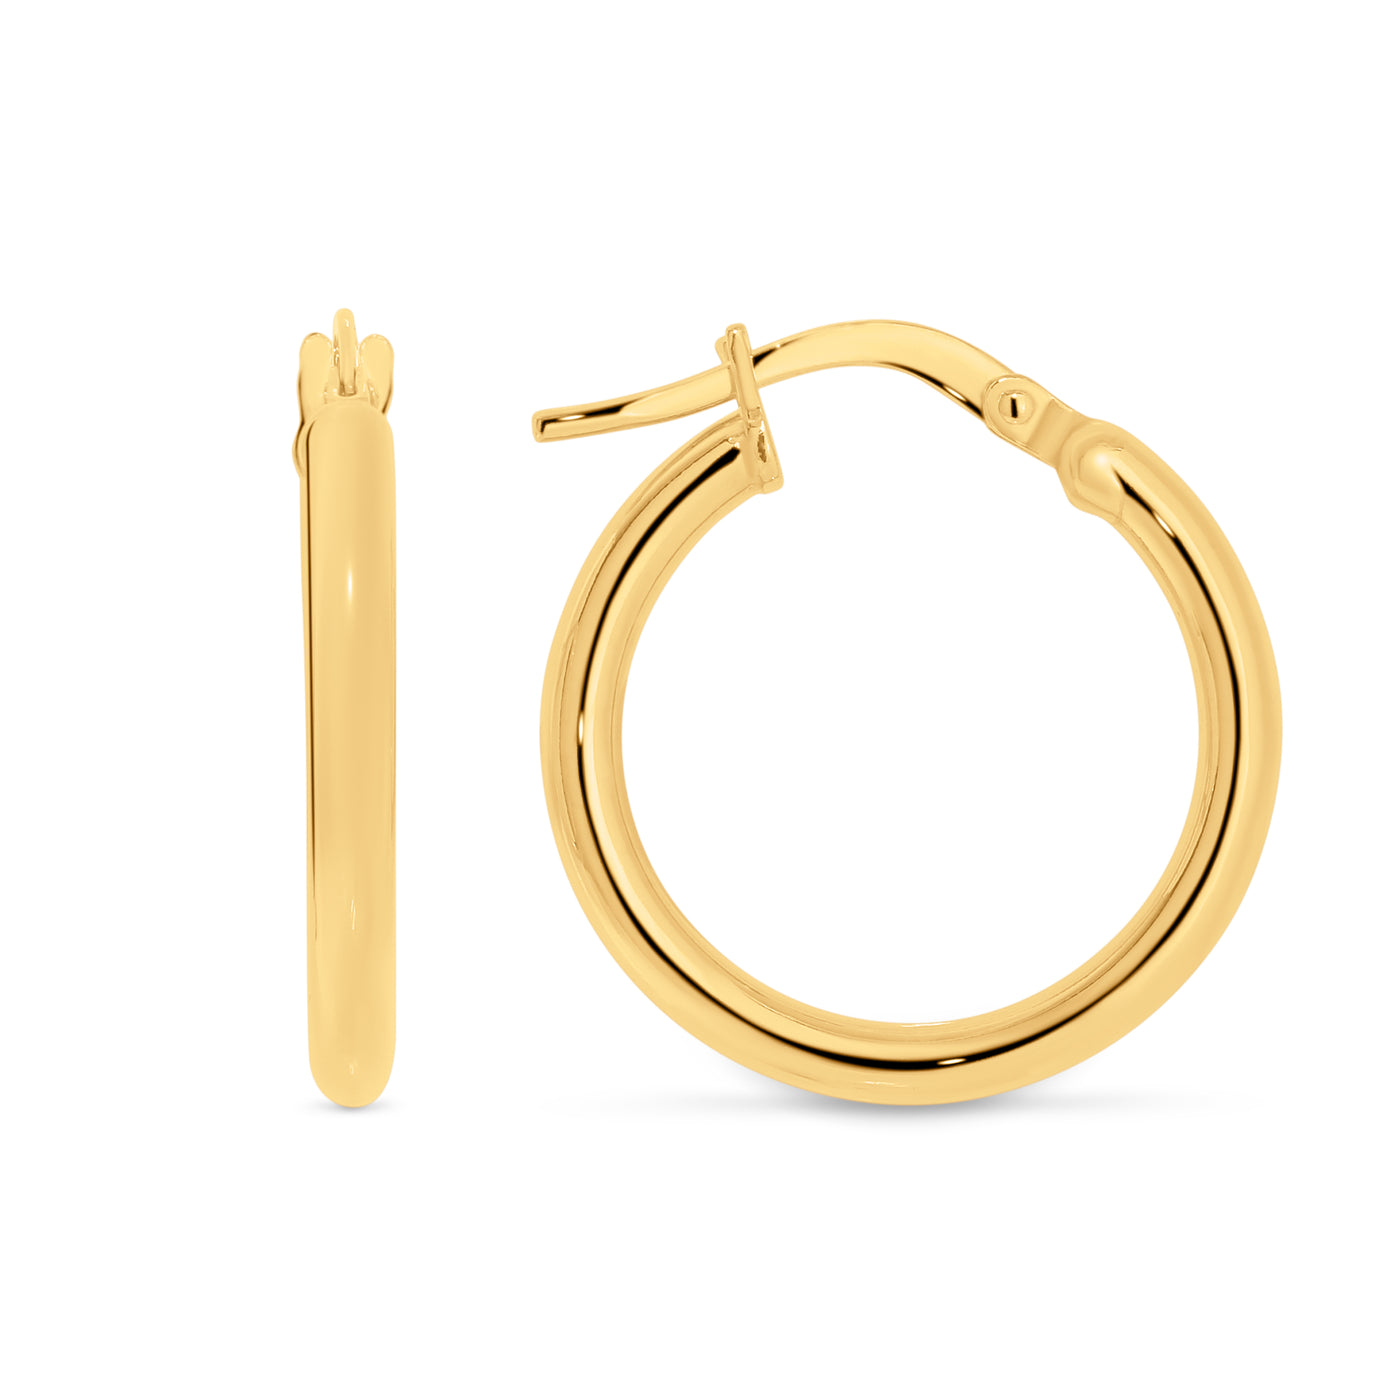 9k Yellow Gold and Silver Bonded Earrings